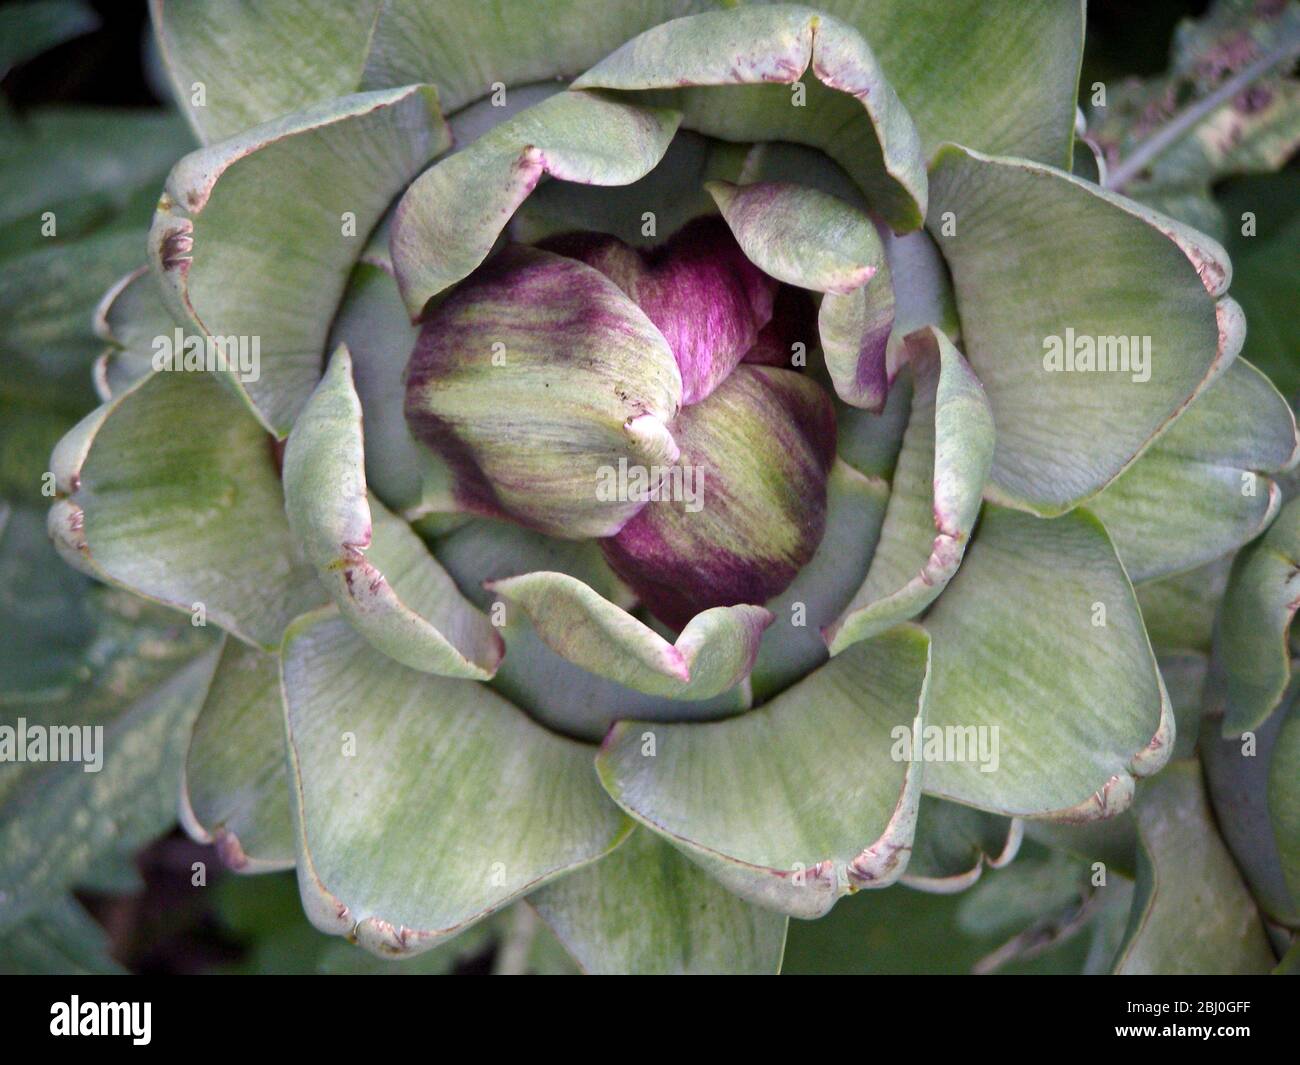 Globe artichoke growing. The Globe artichoke (Cynara scolymus) is a species of thistle. The edible part of the plant is the base (receptacle) of the a Stock Photo